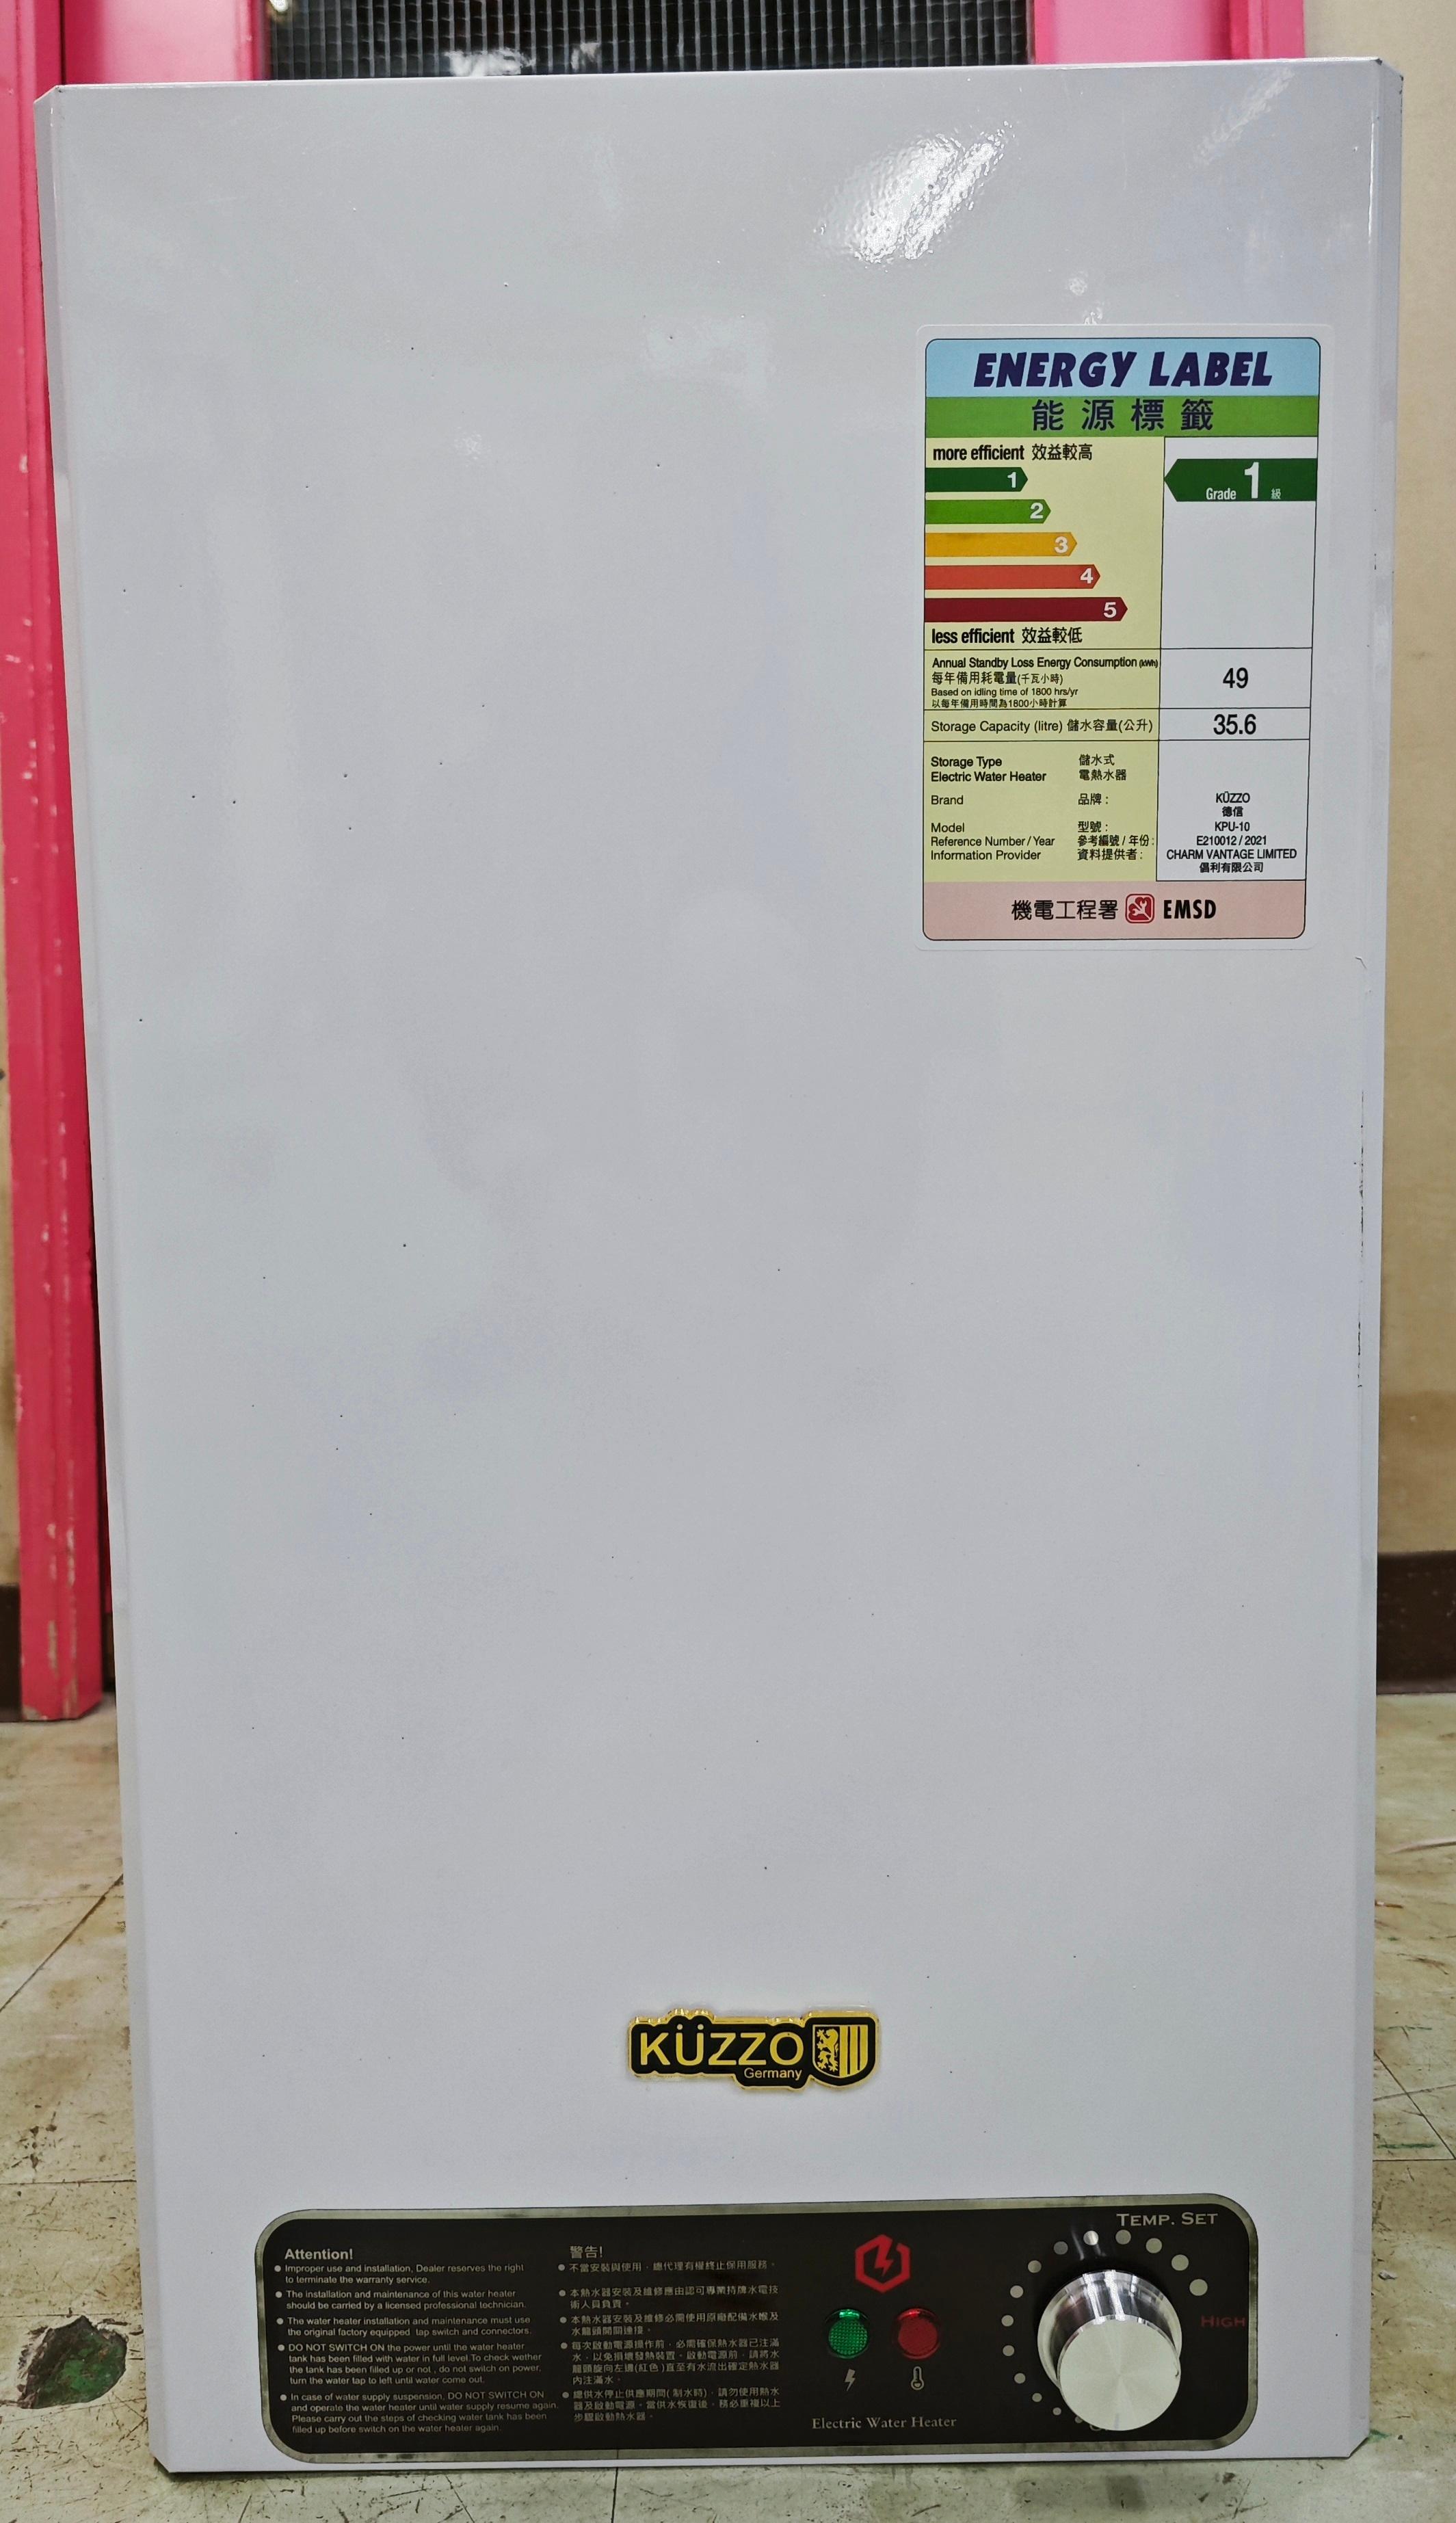 The Electrical and Mechanical Services Department today (January 11) removed one storage type electric water heater model from the record of listed models under the Energy Efficiency (Labelling of Products) Ordinance. Photo shows the storage type electric water heater model.